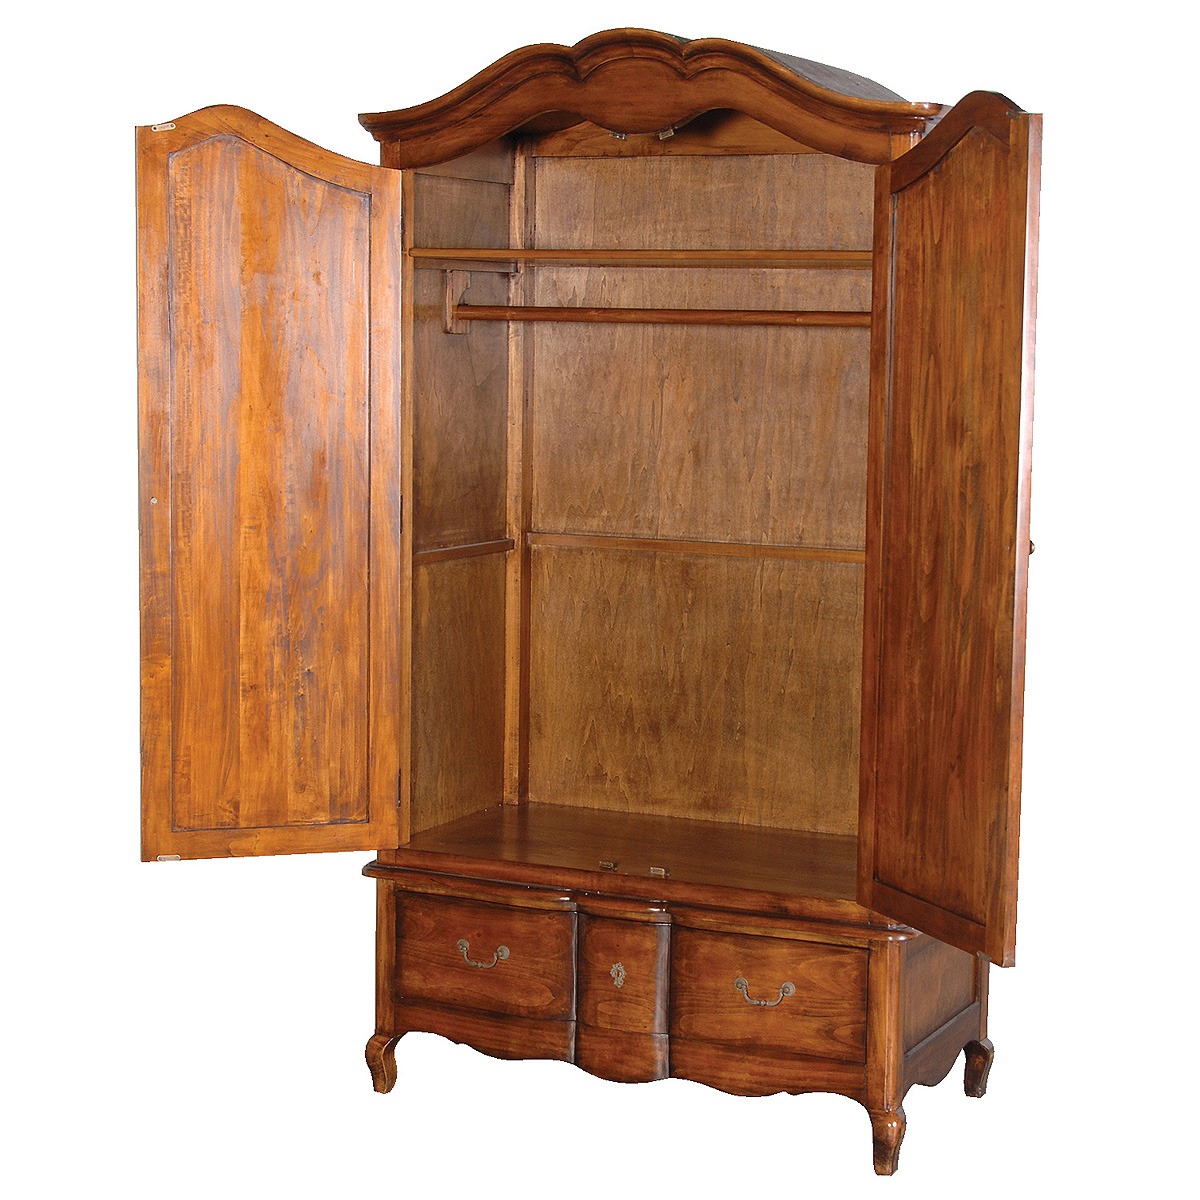 French Wardrobes \u0026 French Armoires  French Bedroom Company